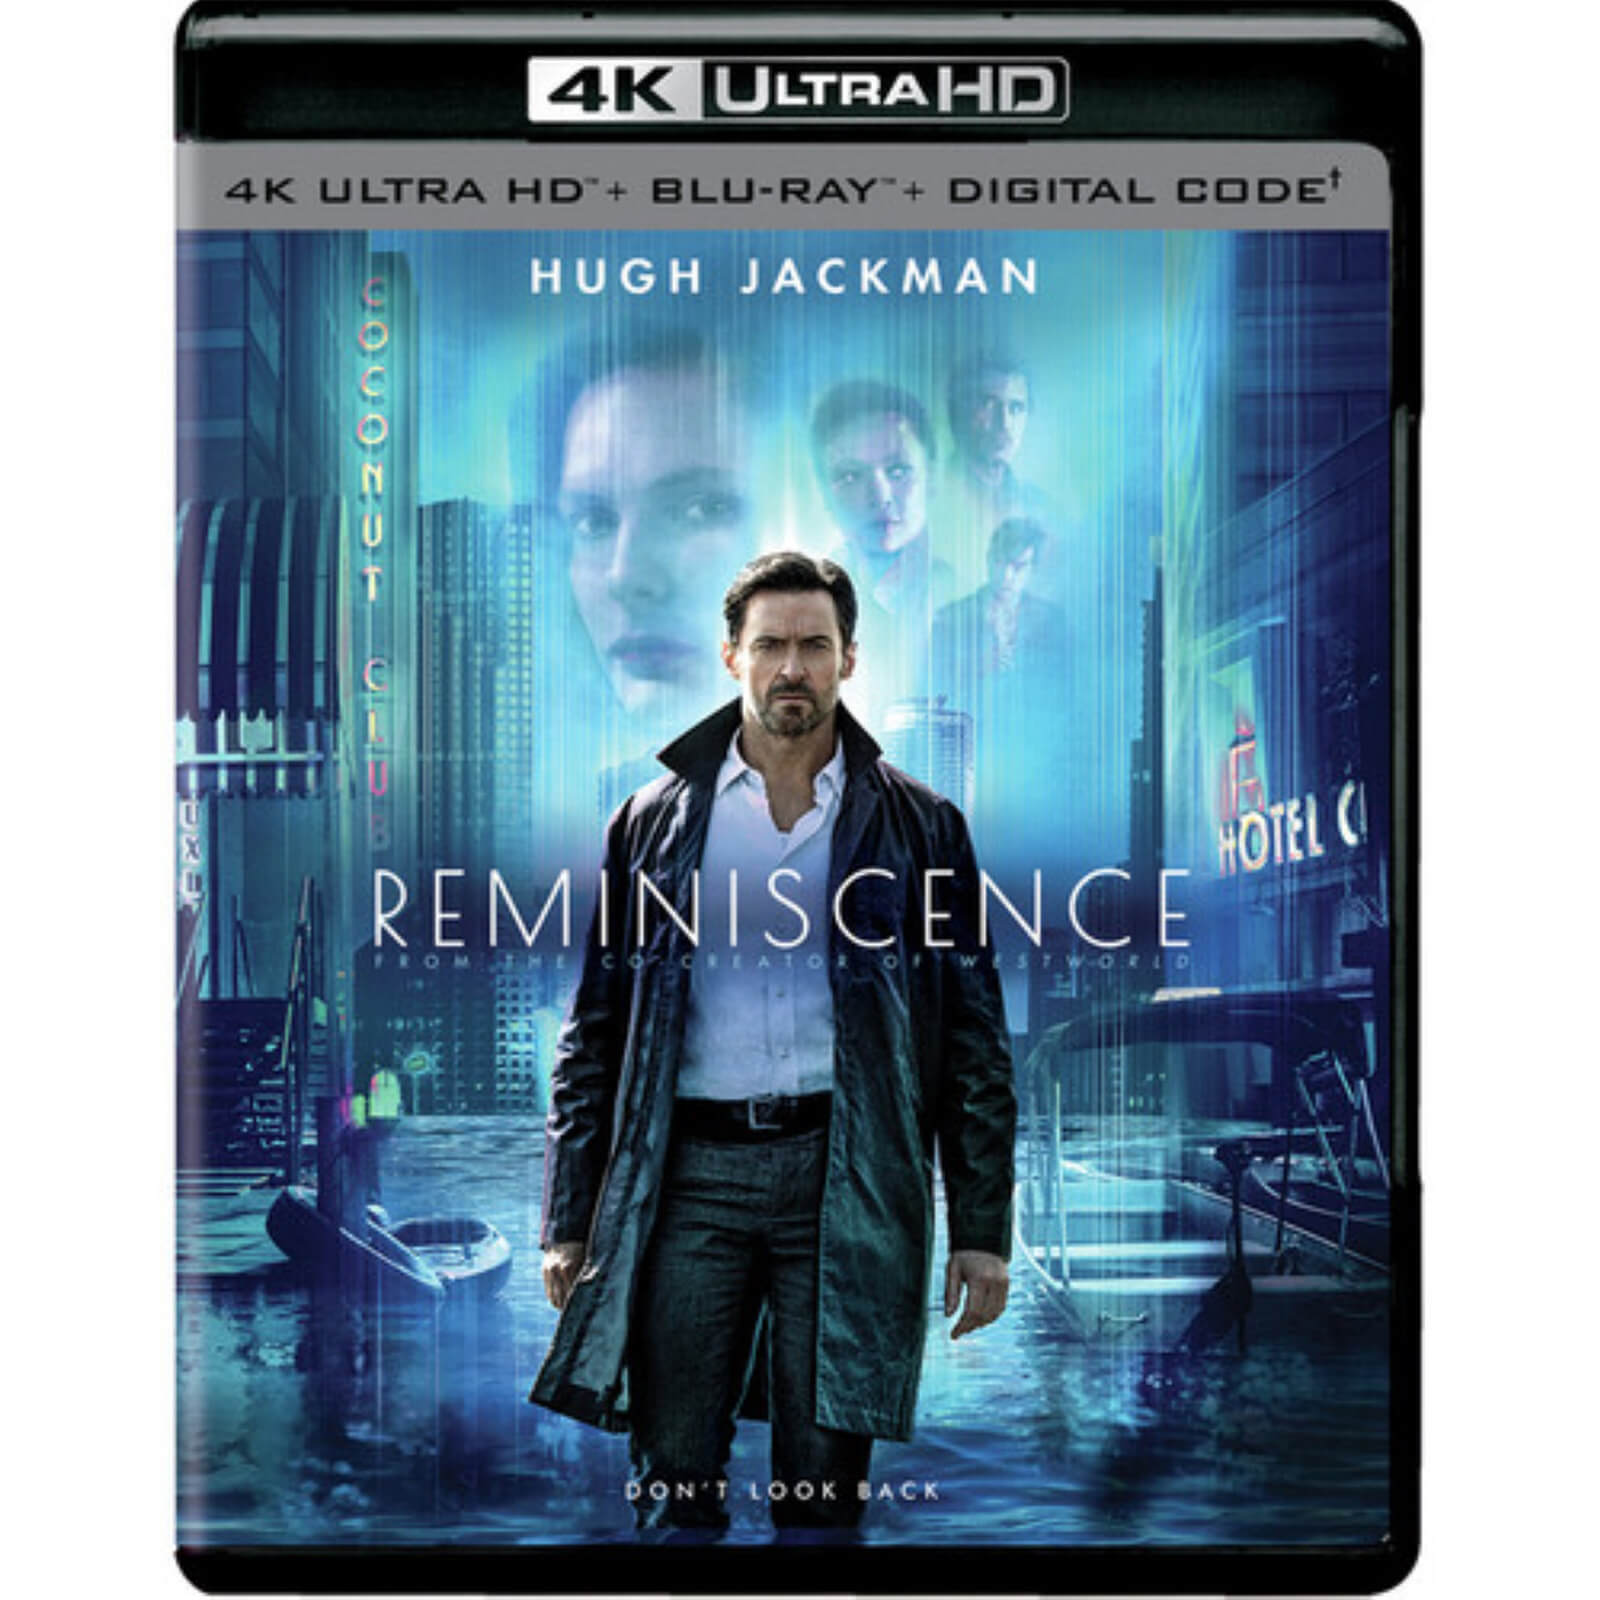 Reminiscence - 4K Ultra HD (Includes Blu-ray) (US Import)